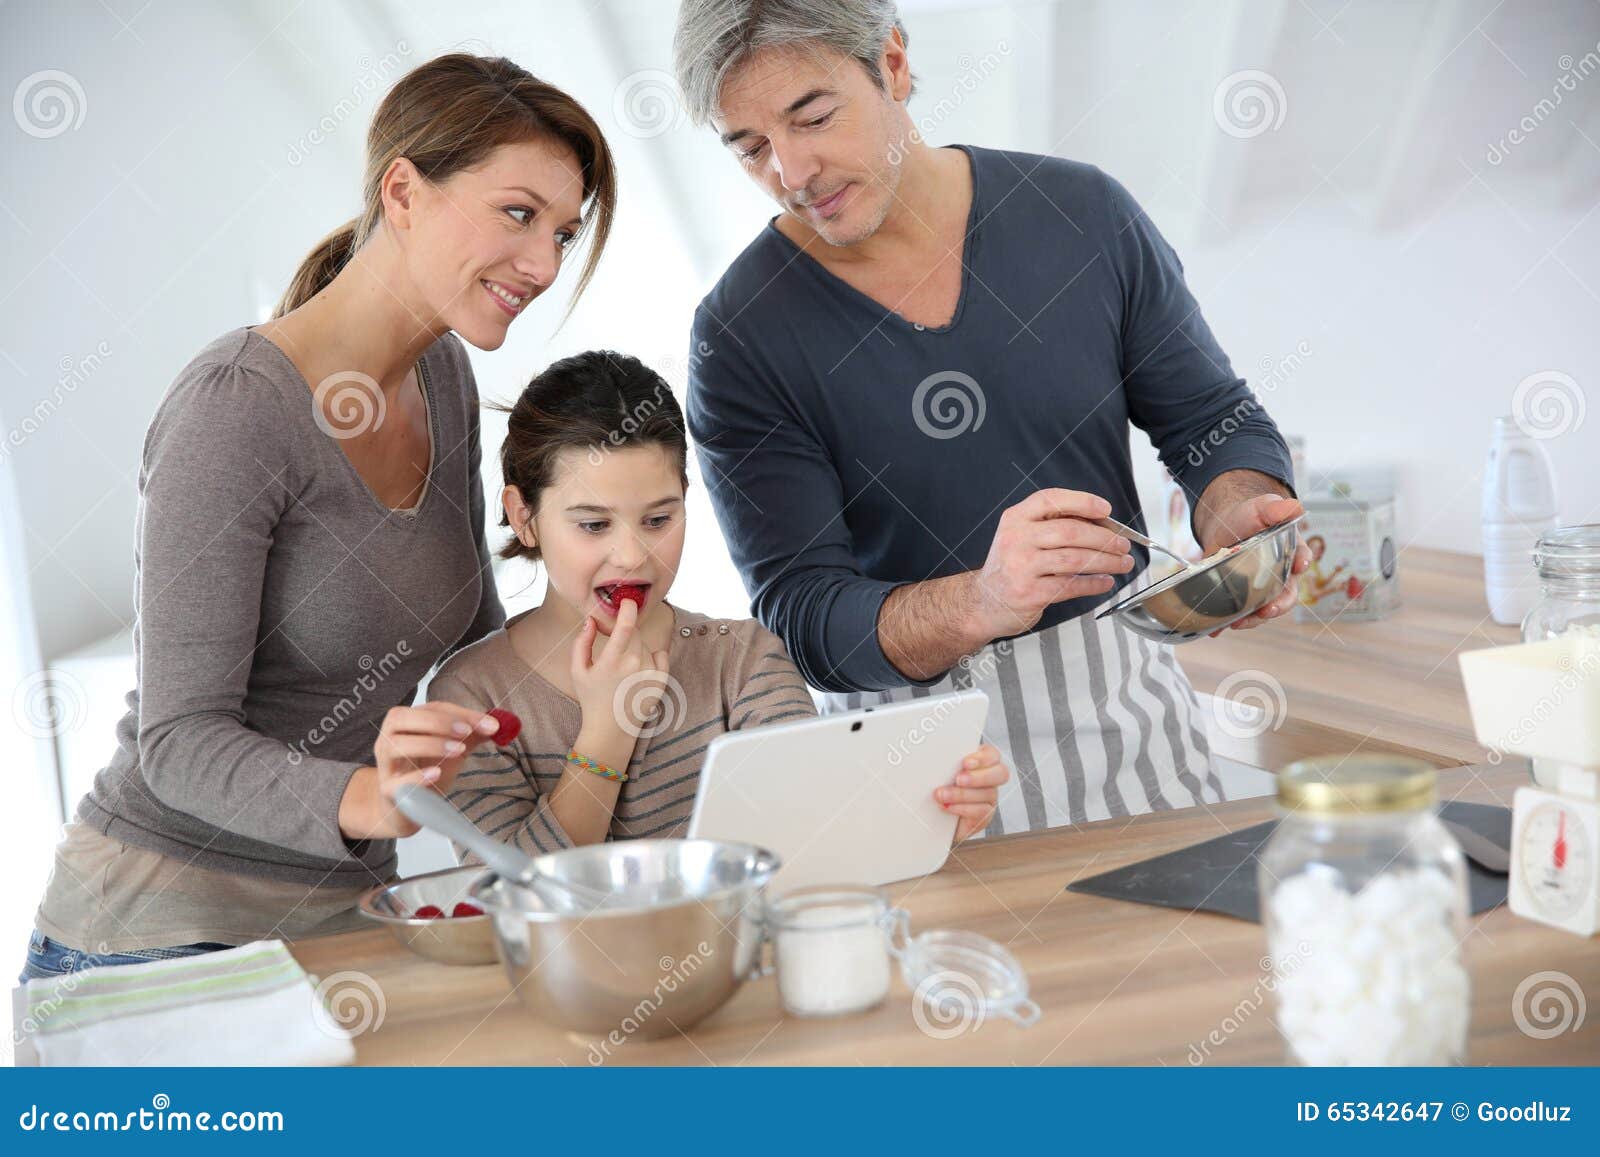 Family in Kitchen Baking Pastries Together Stock Image - Image of